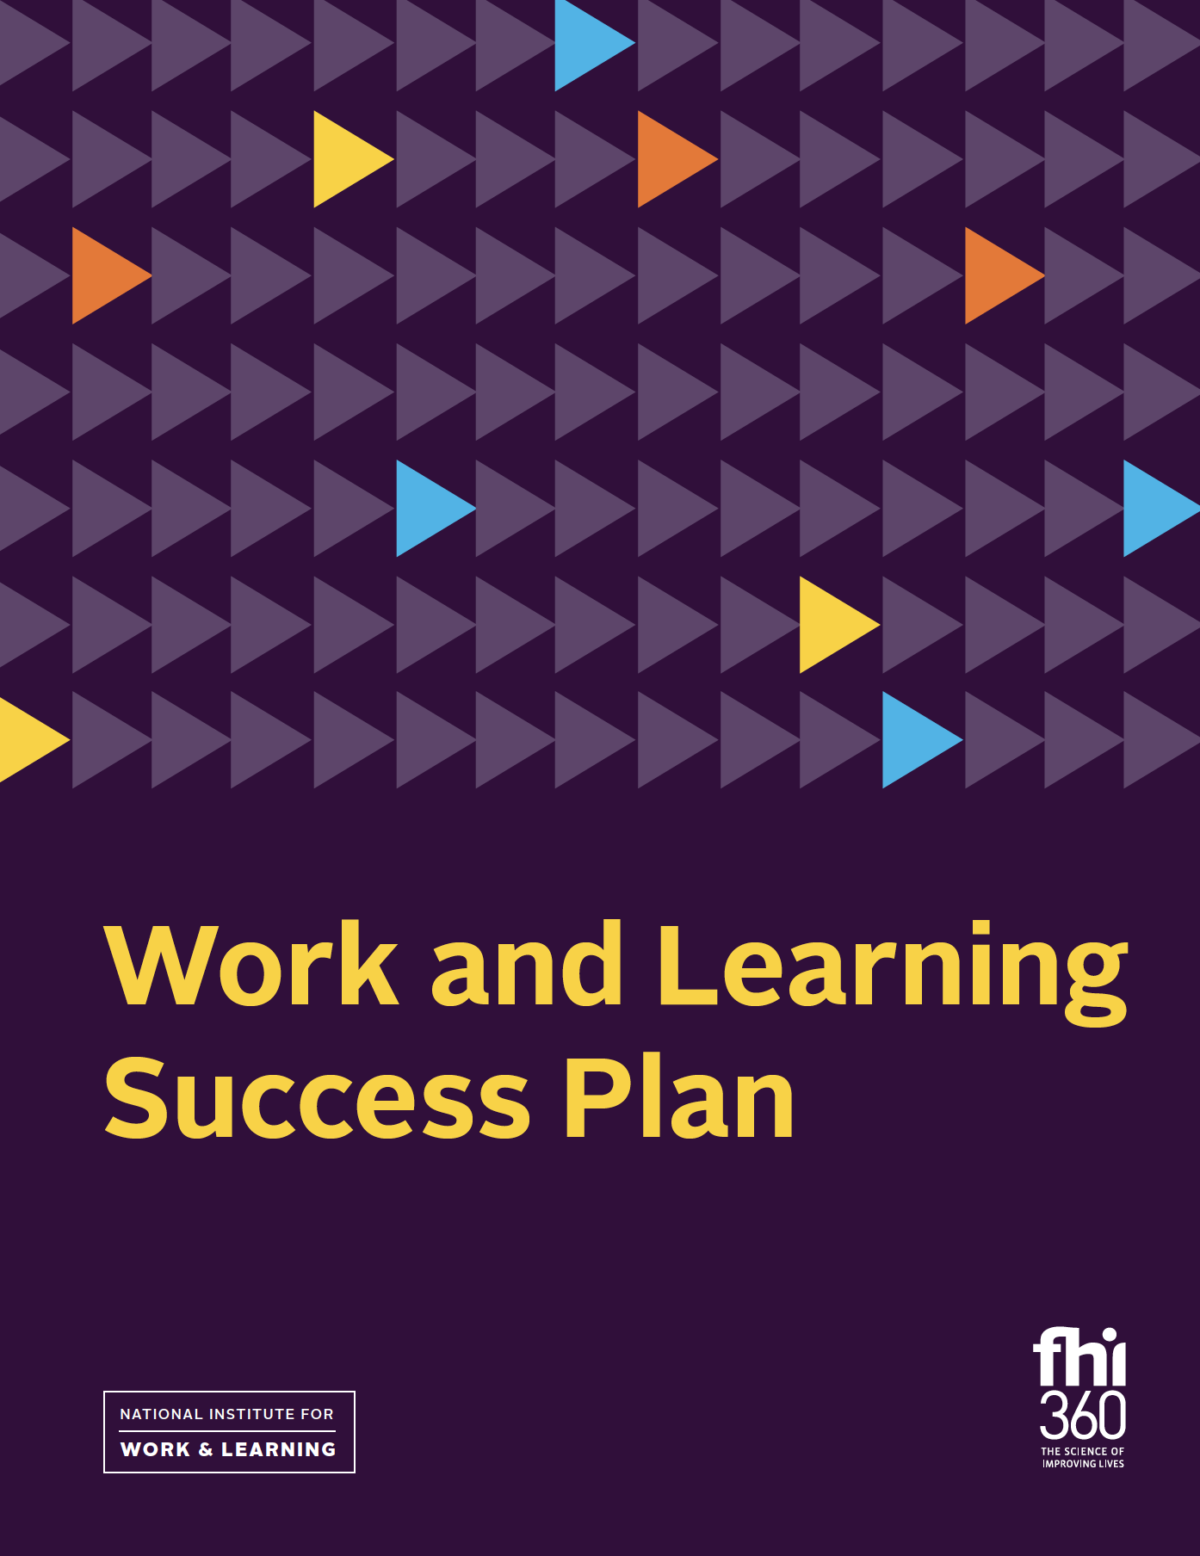 Work and Learning Success Plan